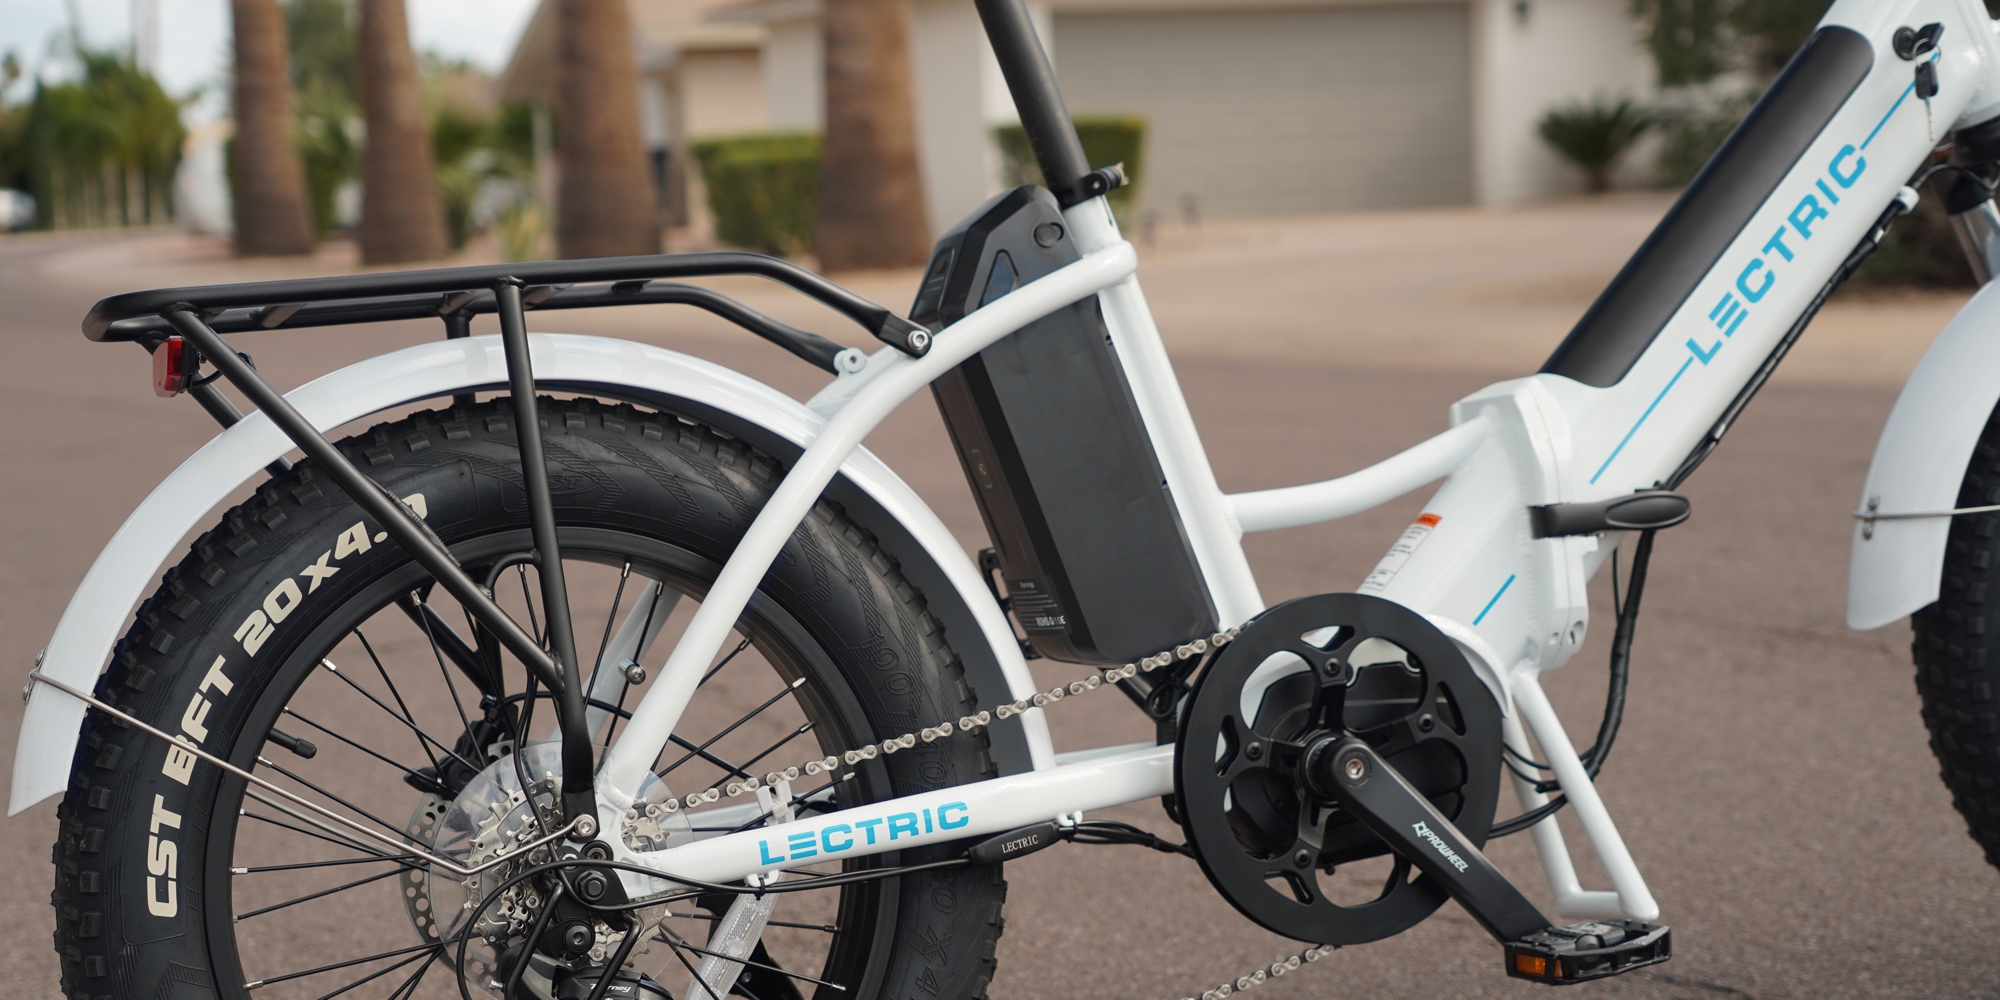 Lectric XPremium e-bike launched with mid-drive motor and dual batteries